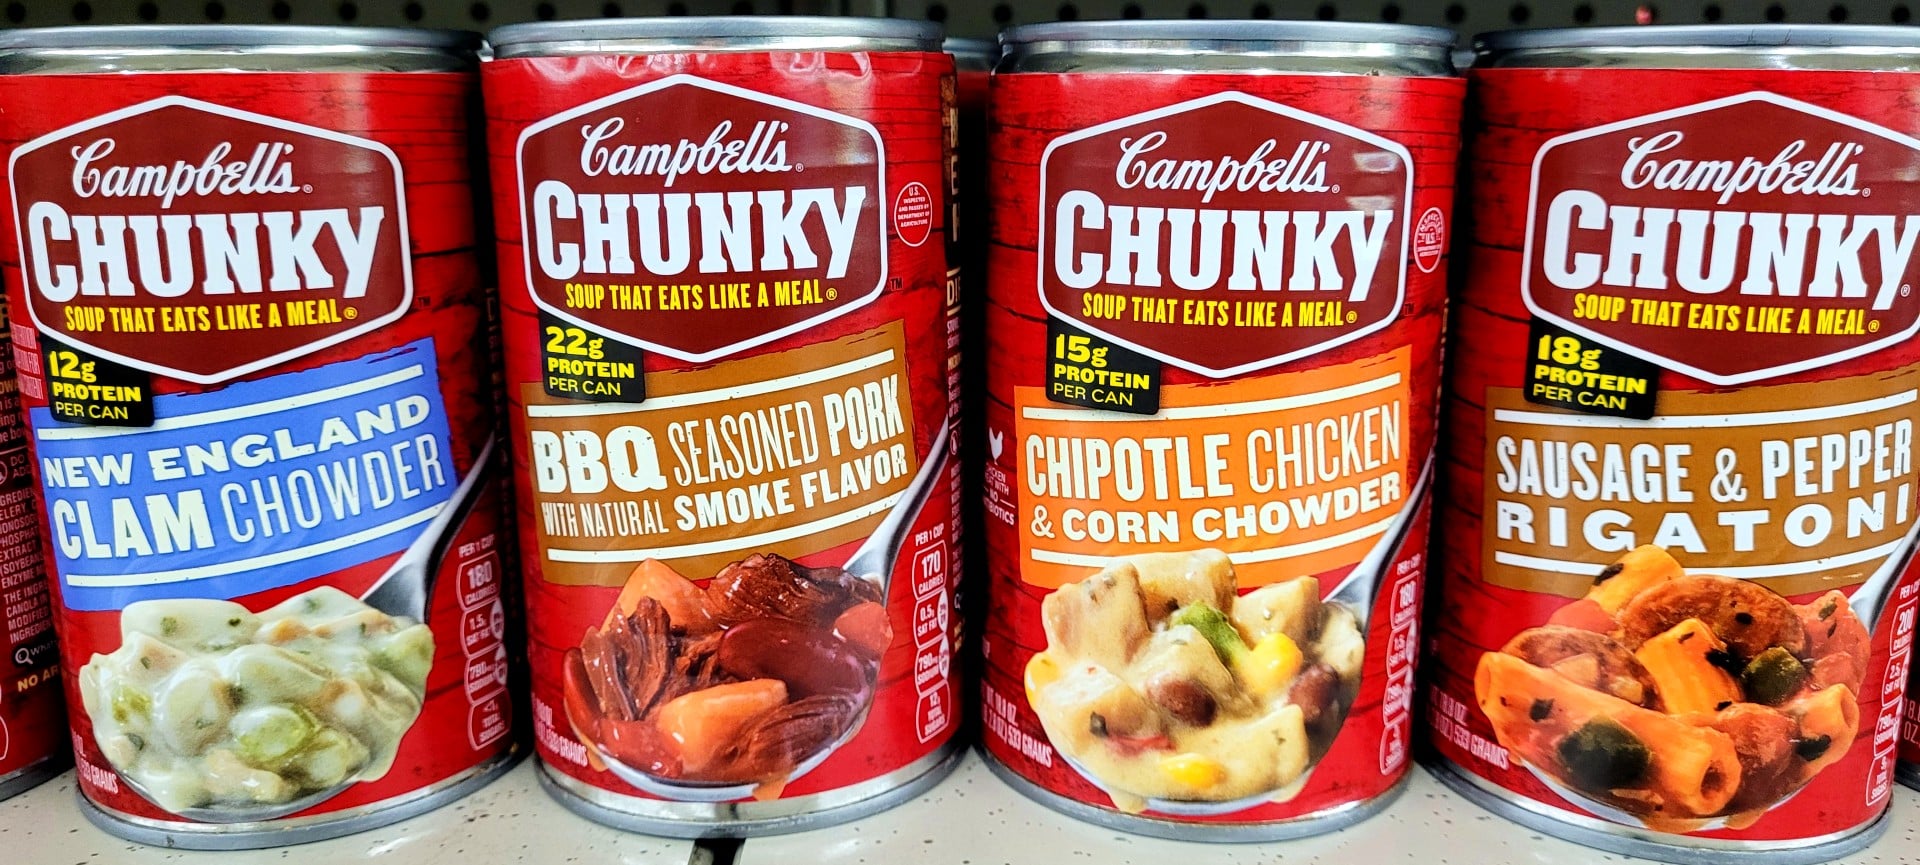 ) Discounted canned food deals